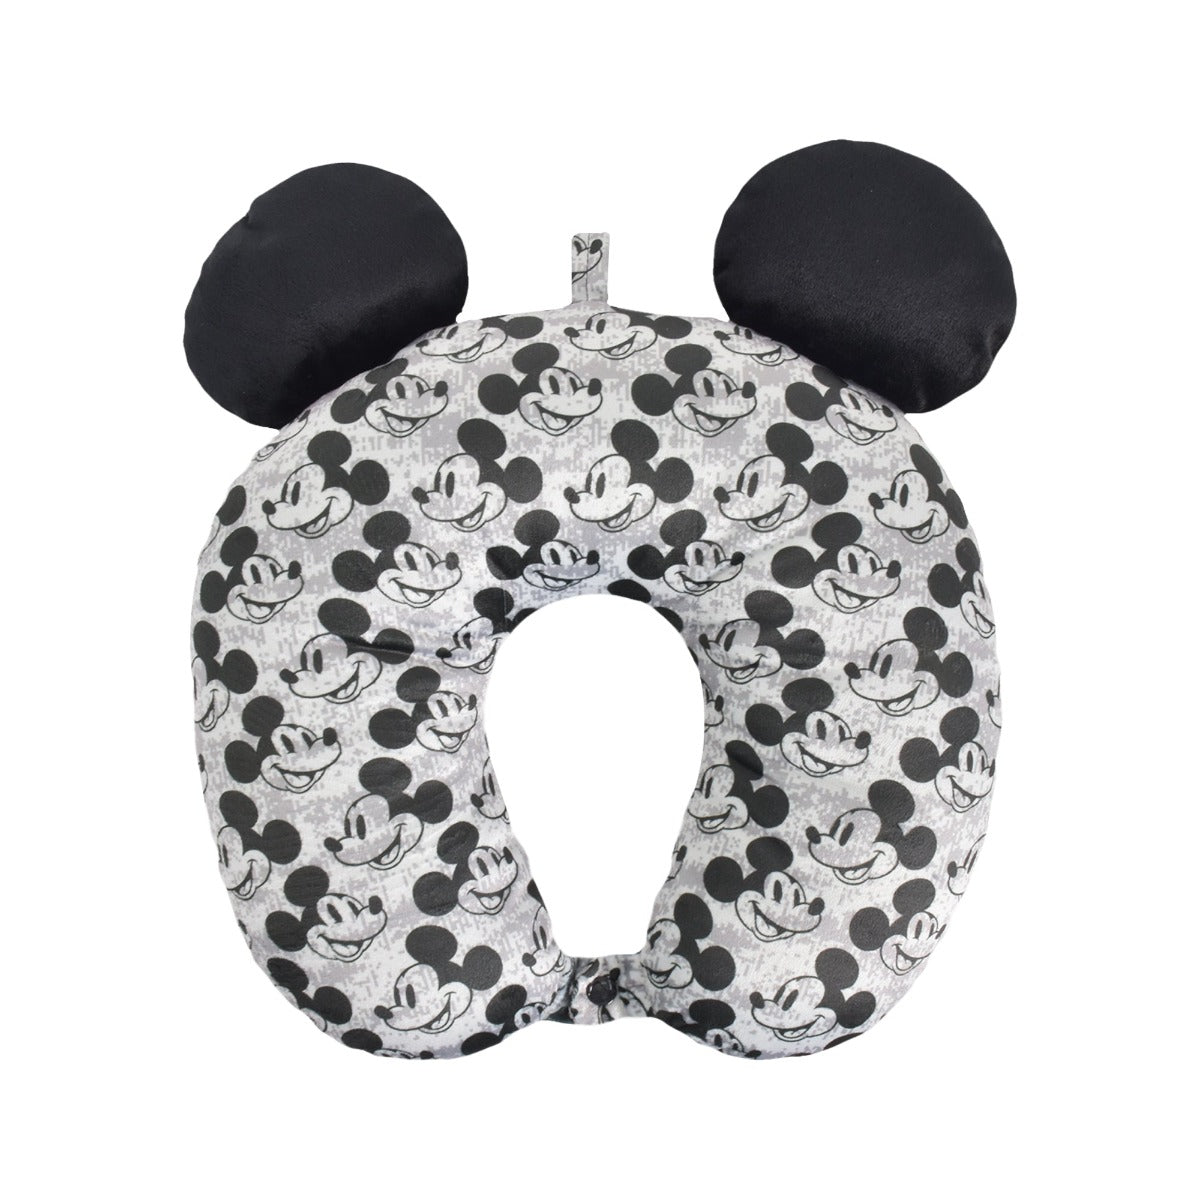 Grey Disney Ful Mickey Mouse neck pillow - best neckpillow for traveling